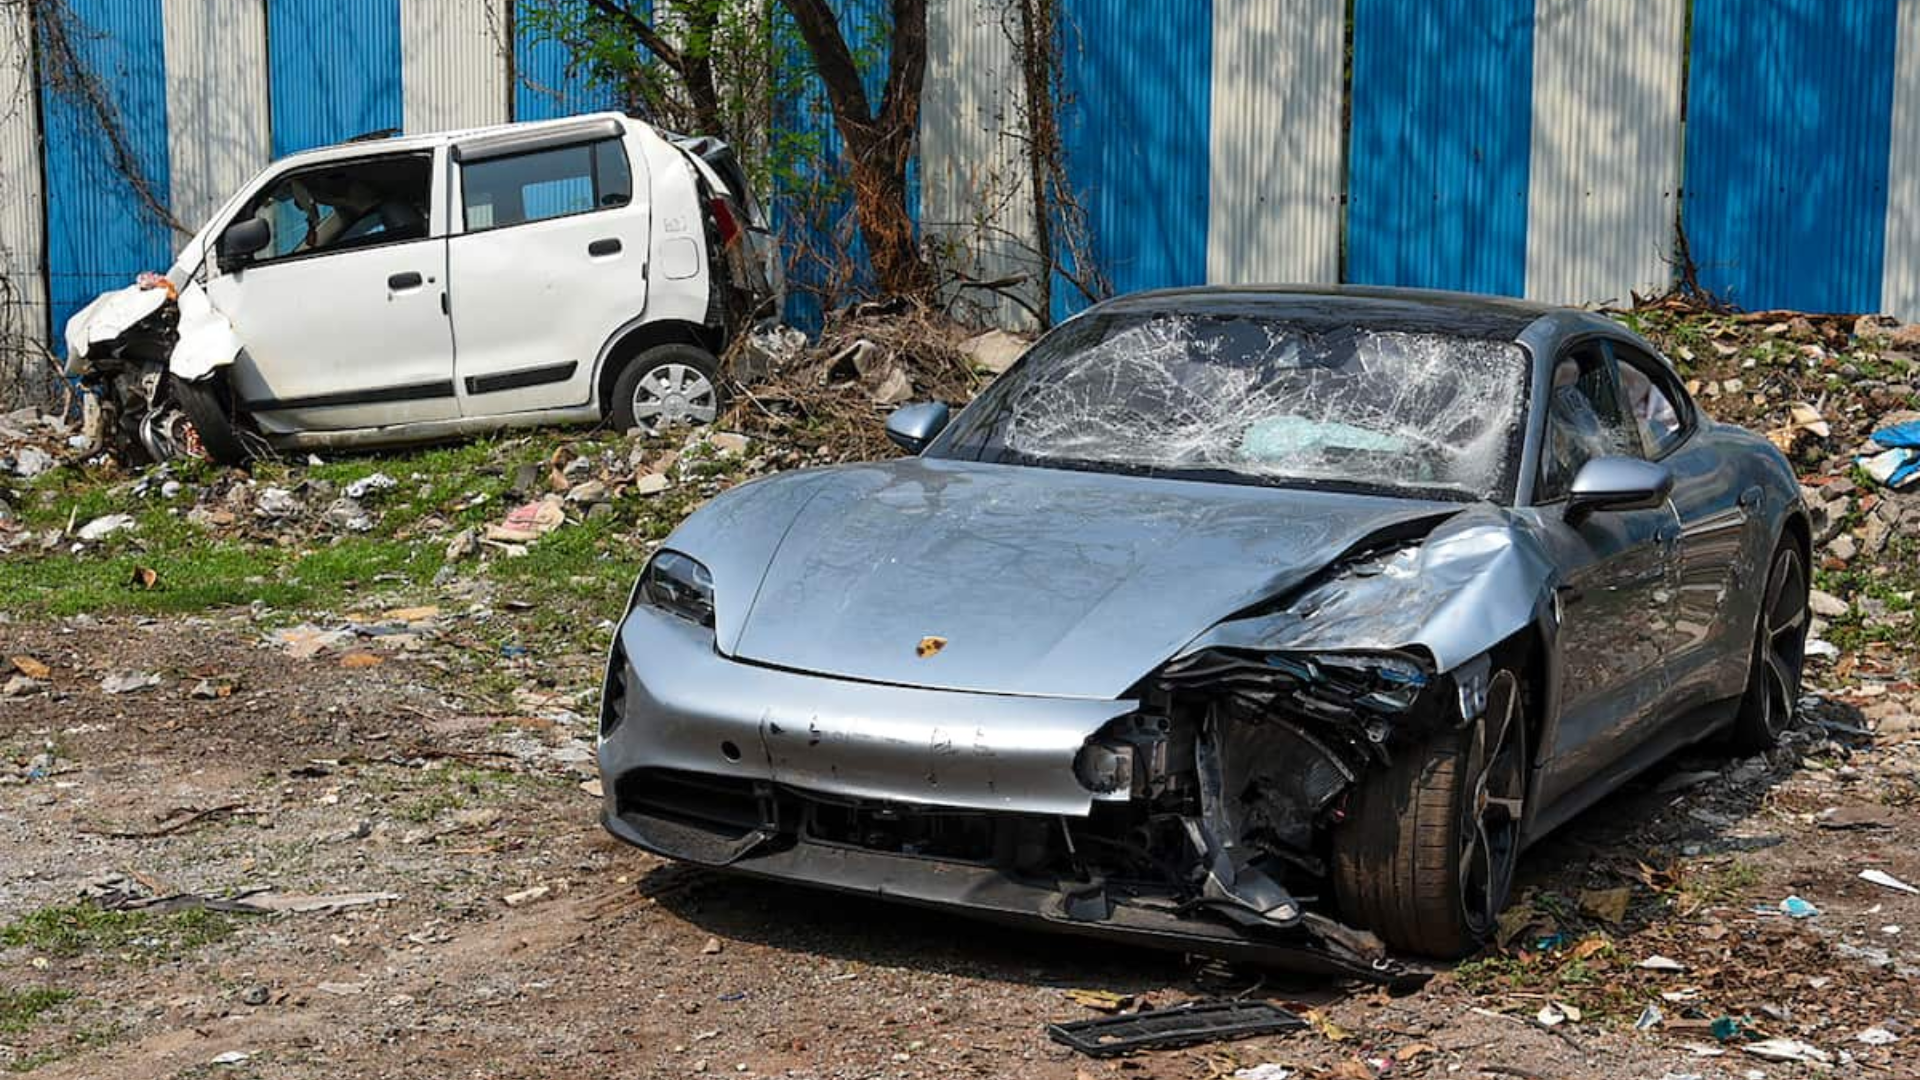 Pune Porsche Crash: Accused Minor To Stay At Observation Home Until June 25